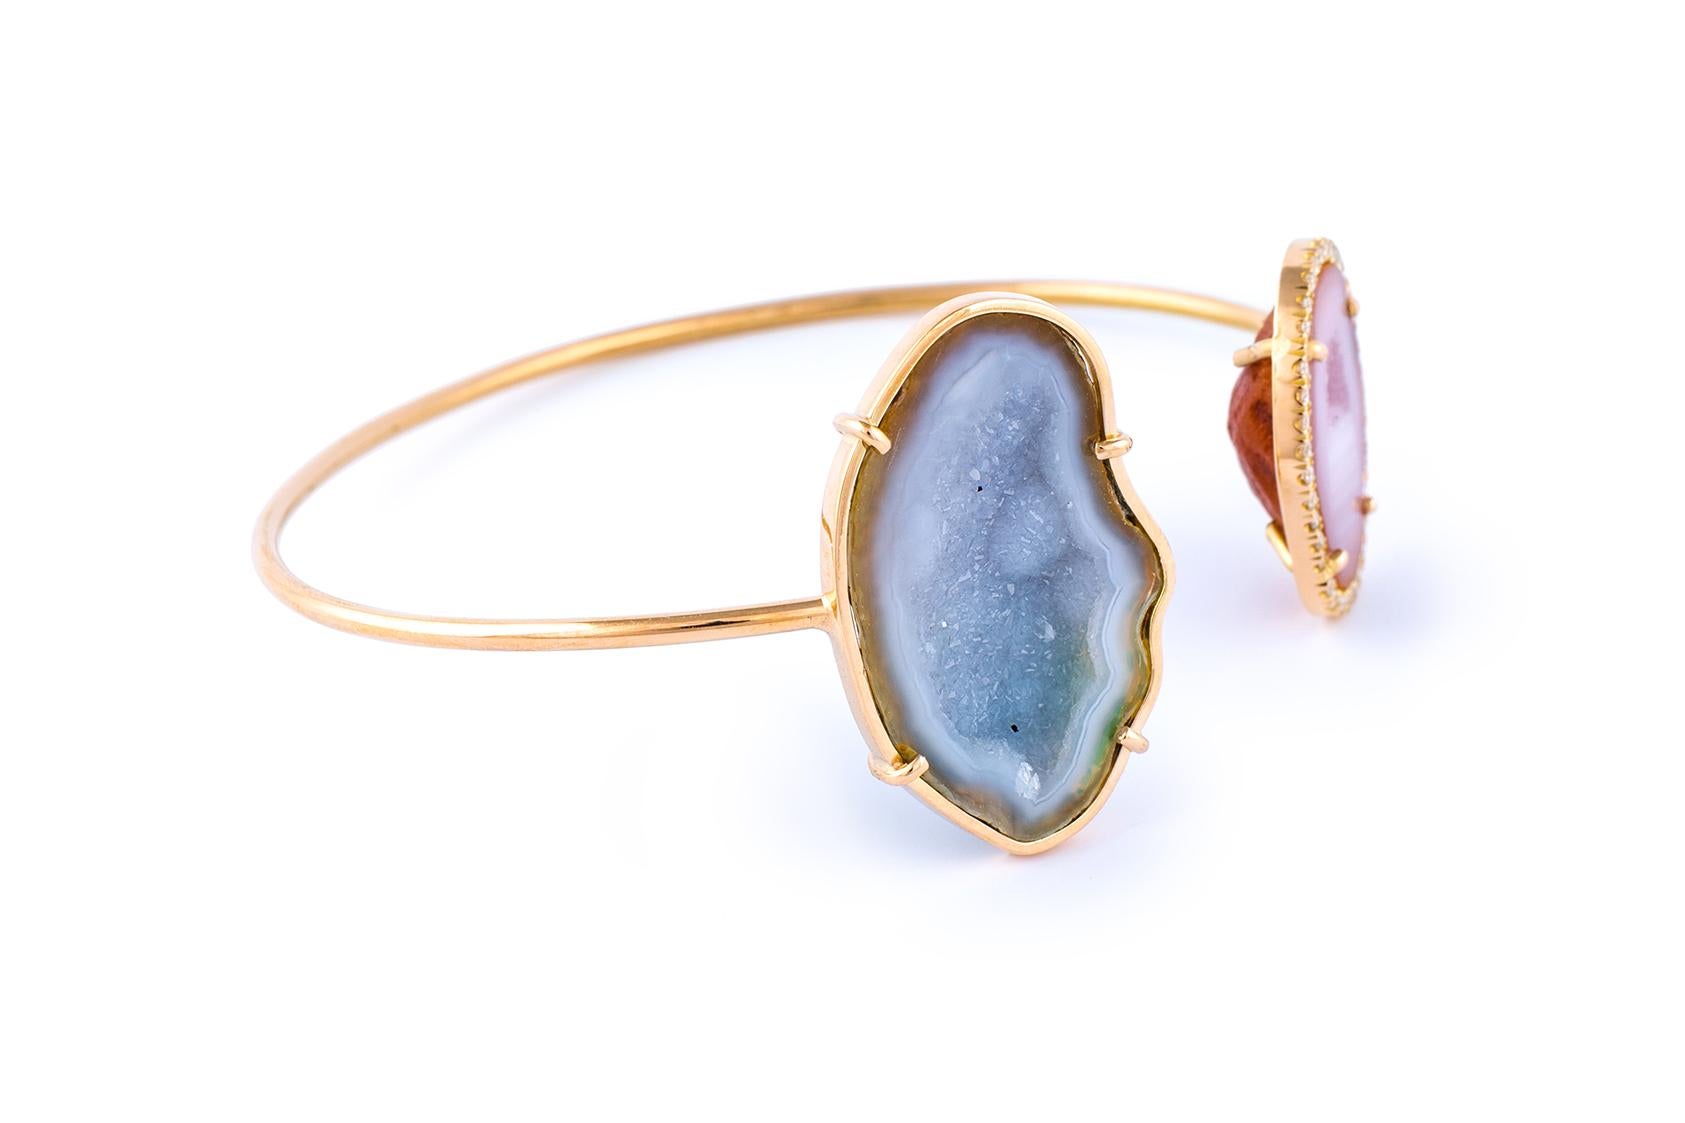 Handmade in Antwerp, this bangle gives you an instant Summer feeling.
Set in 18k rose gold, surrounded by 0.26 ct sparkling diamonds.
The agate geodes are blue and pink. The colors change with sunlight and the color of your clothes. Perfect with